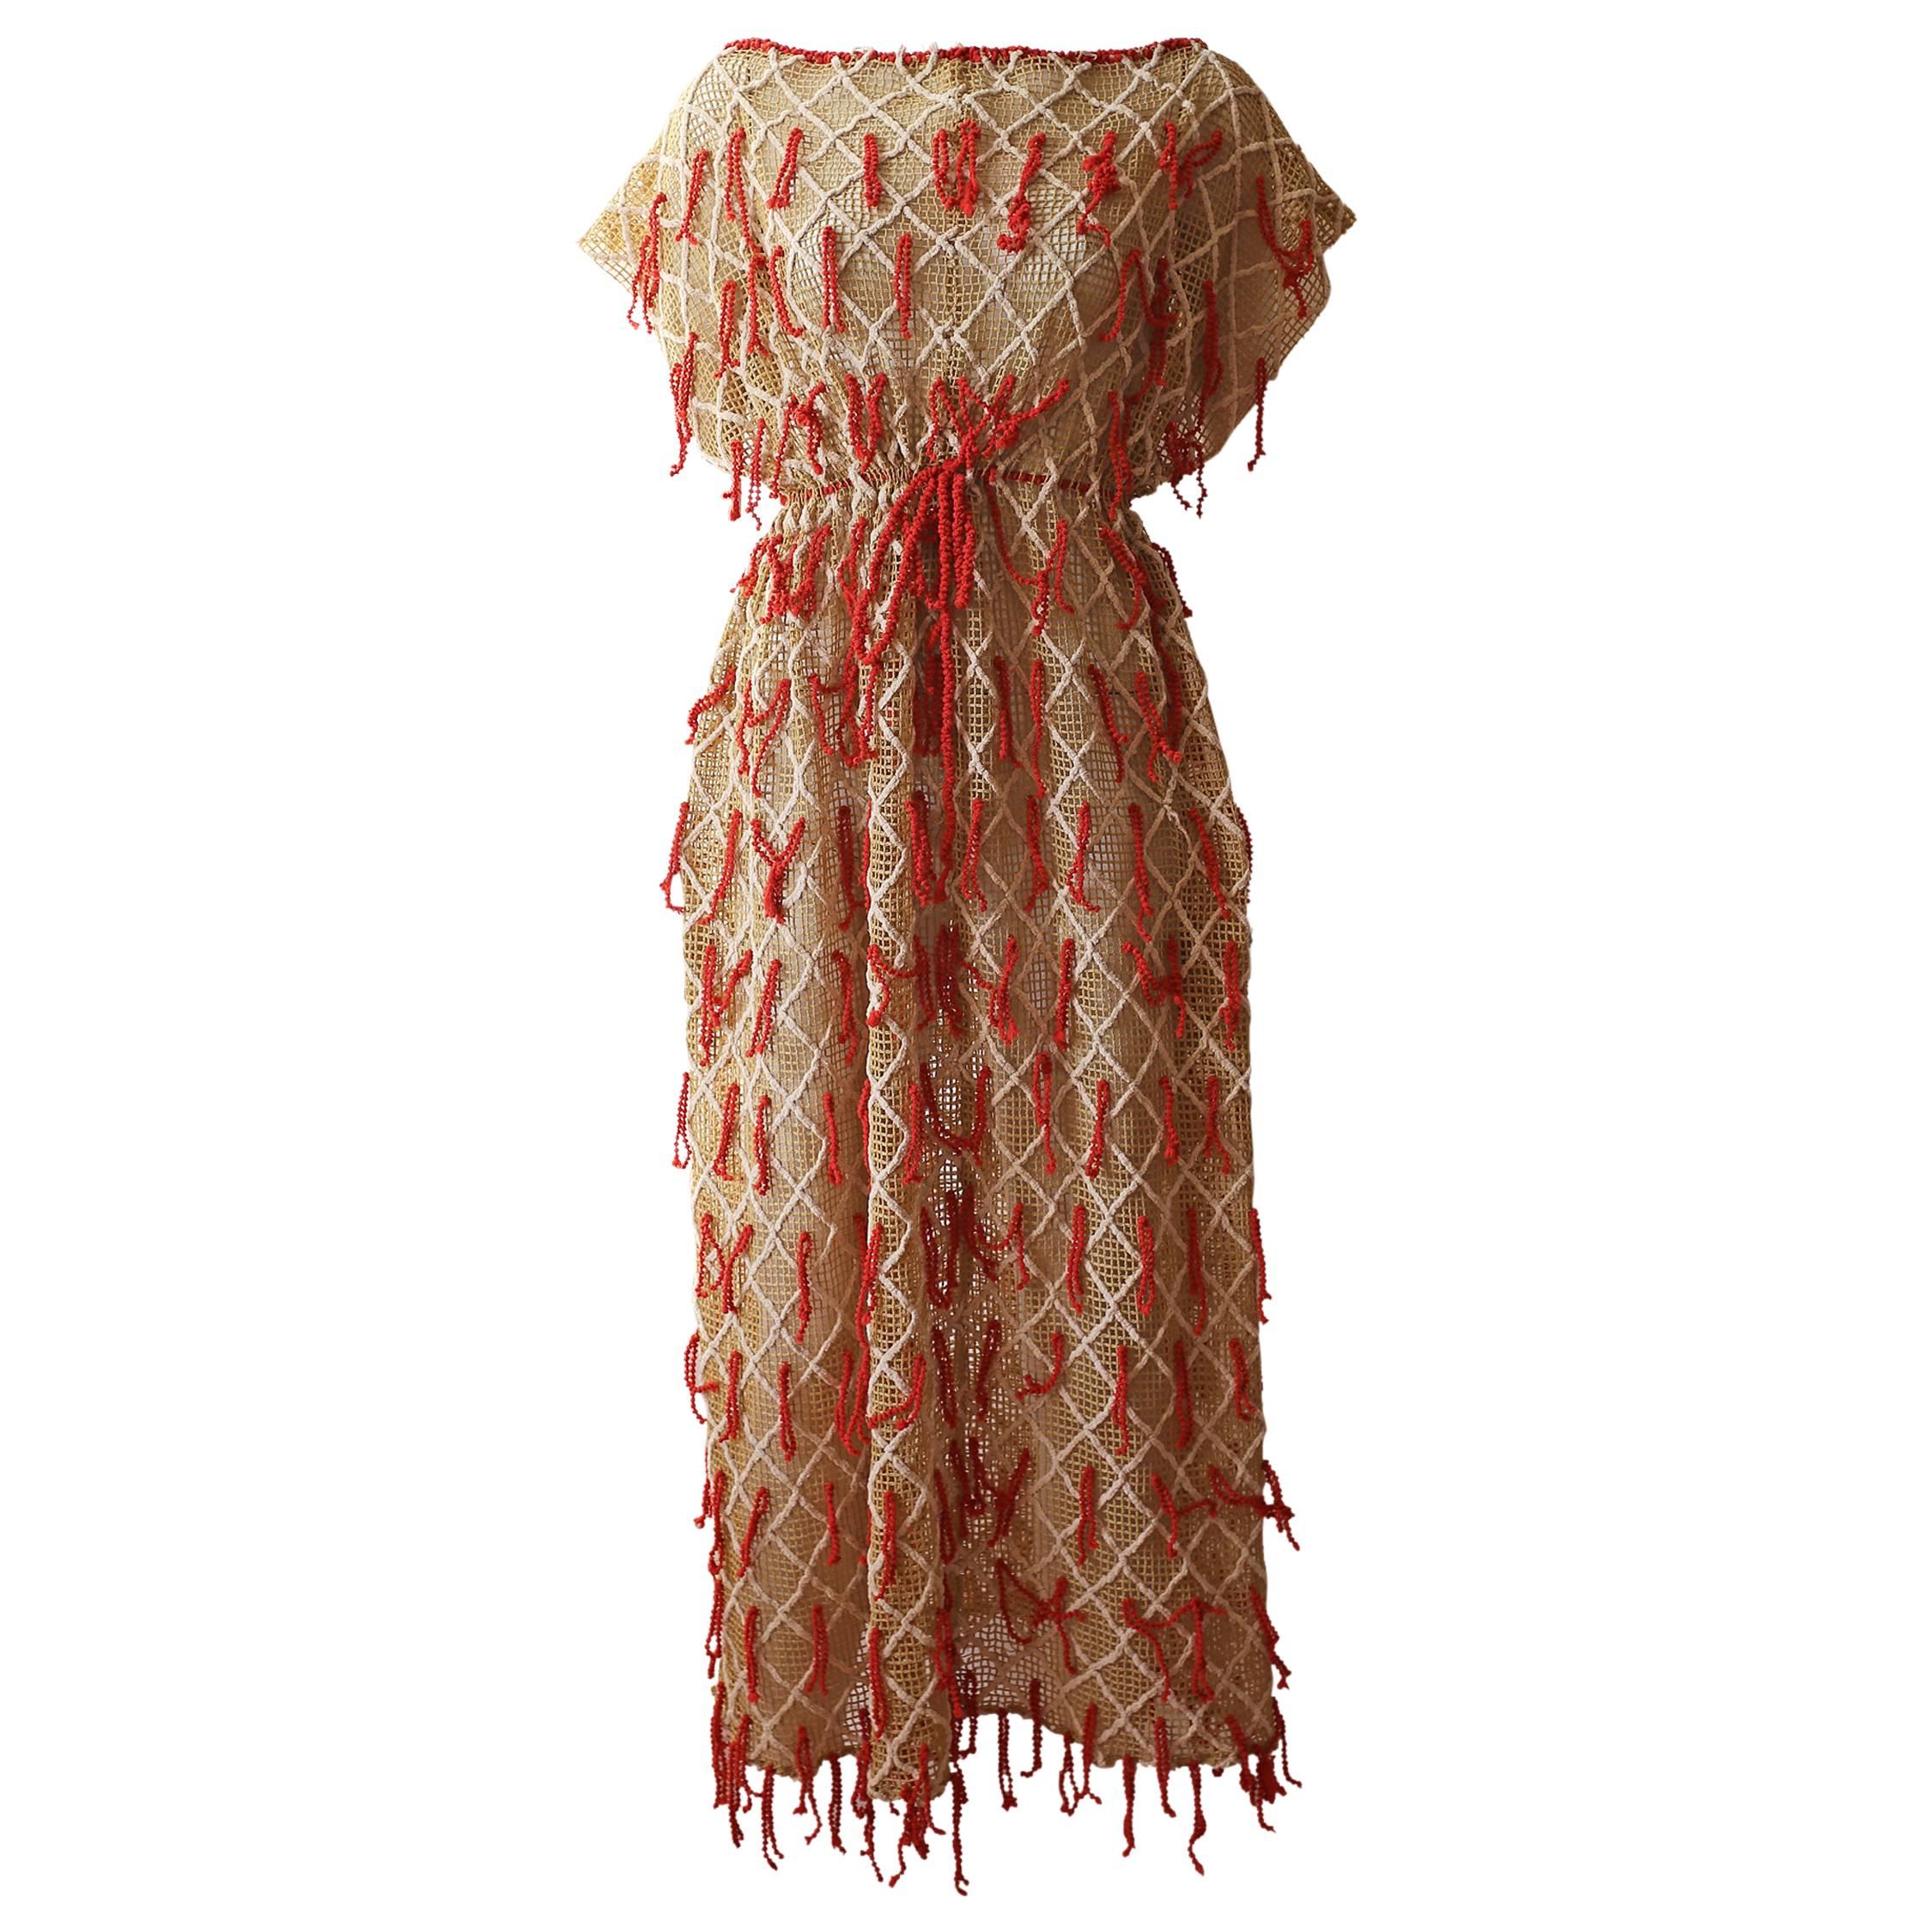 Embroidered netted dress with tassels, c. 1970